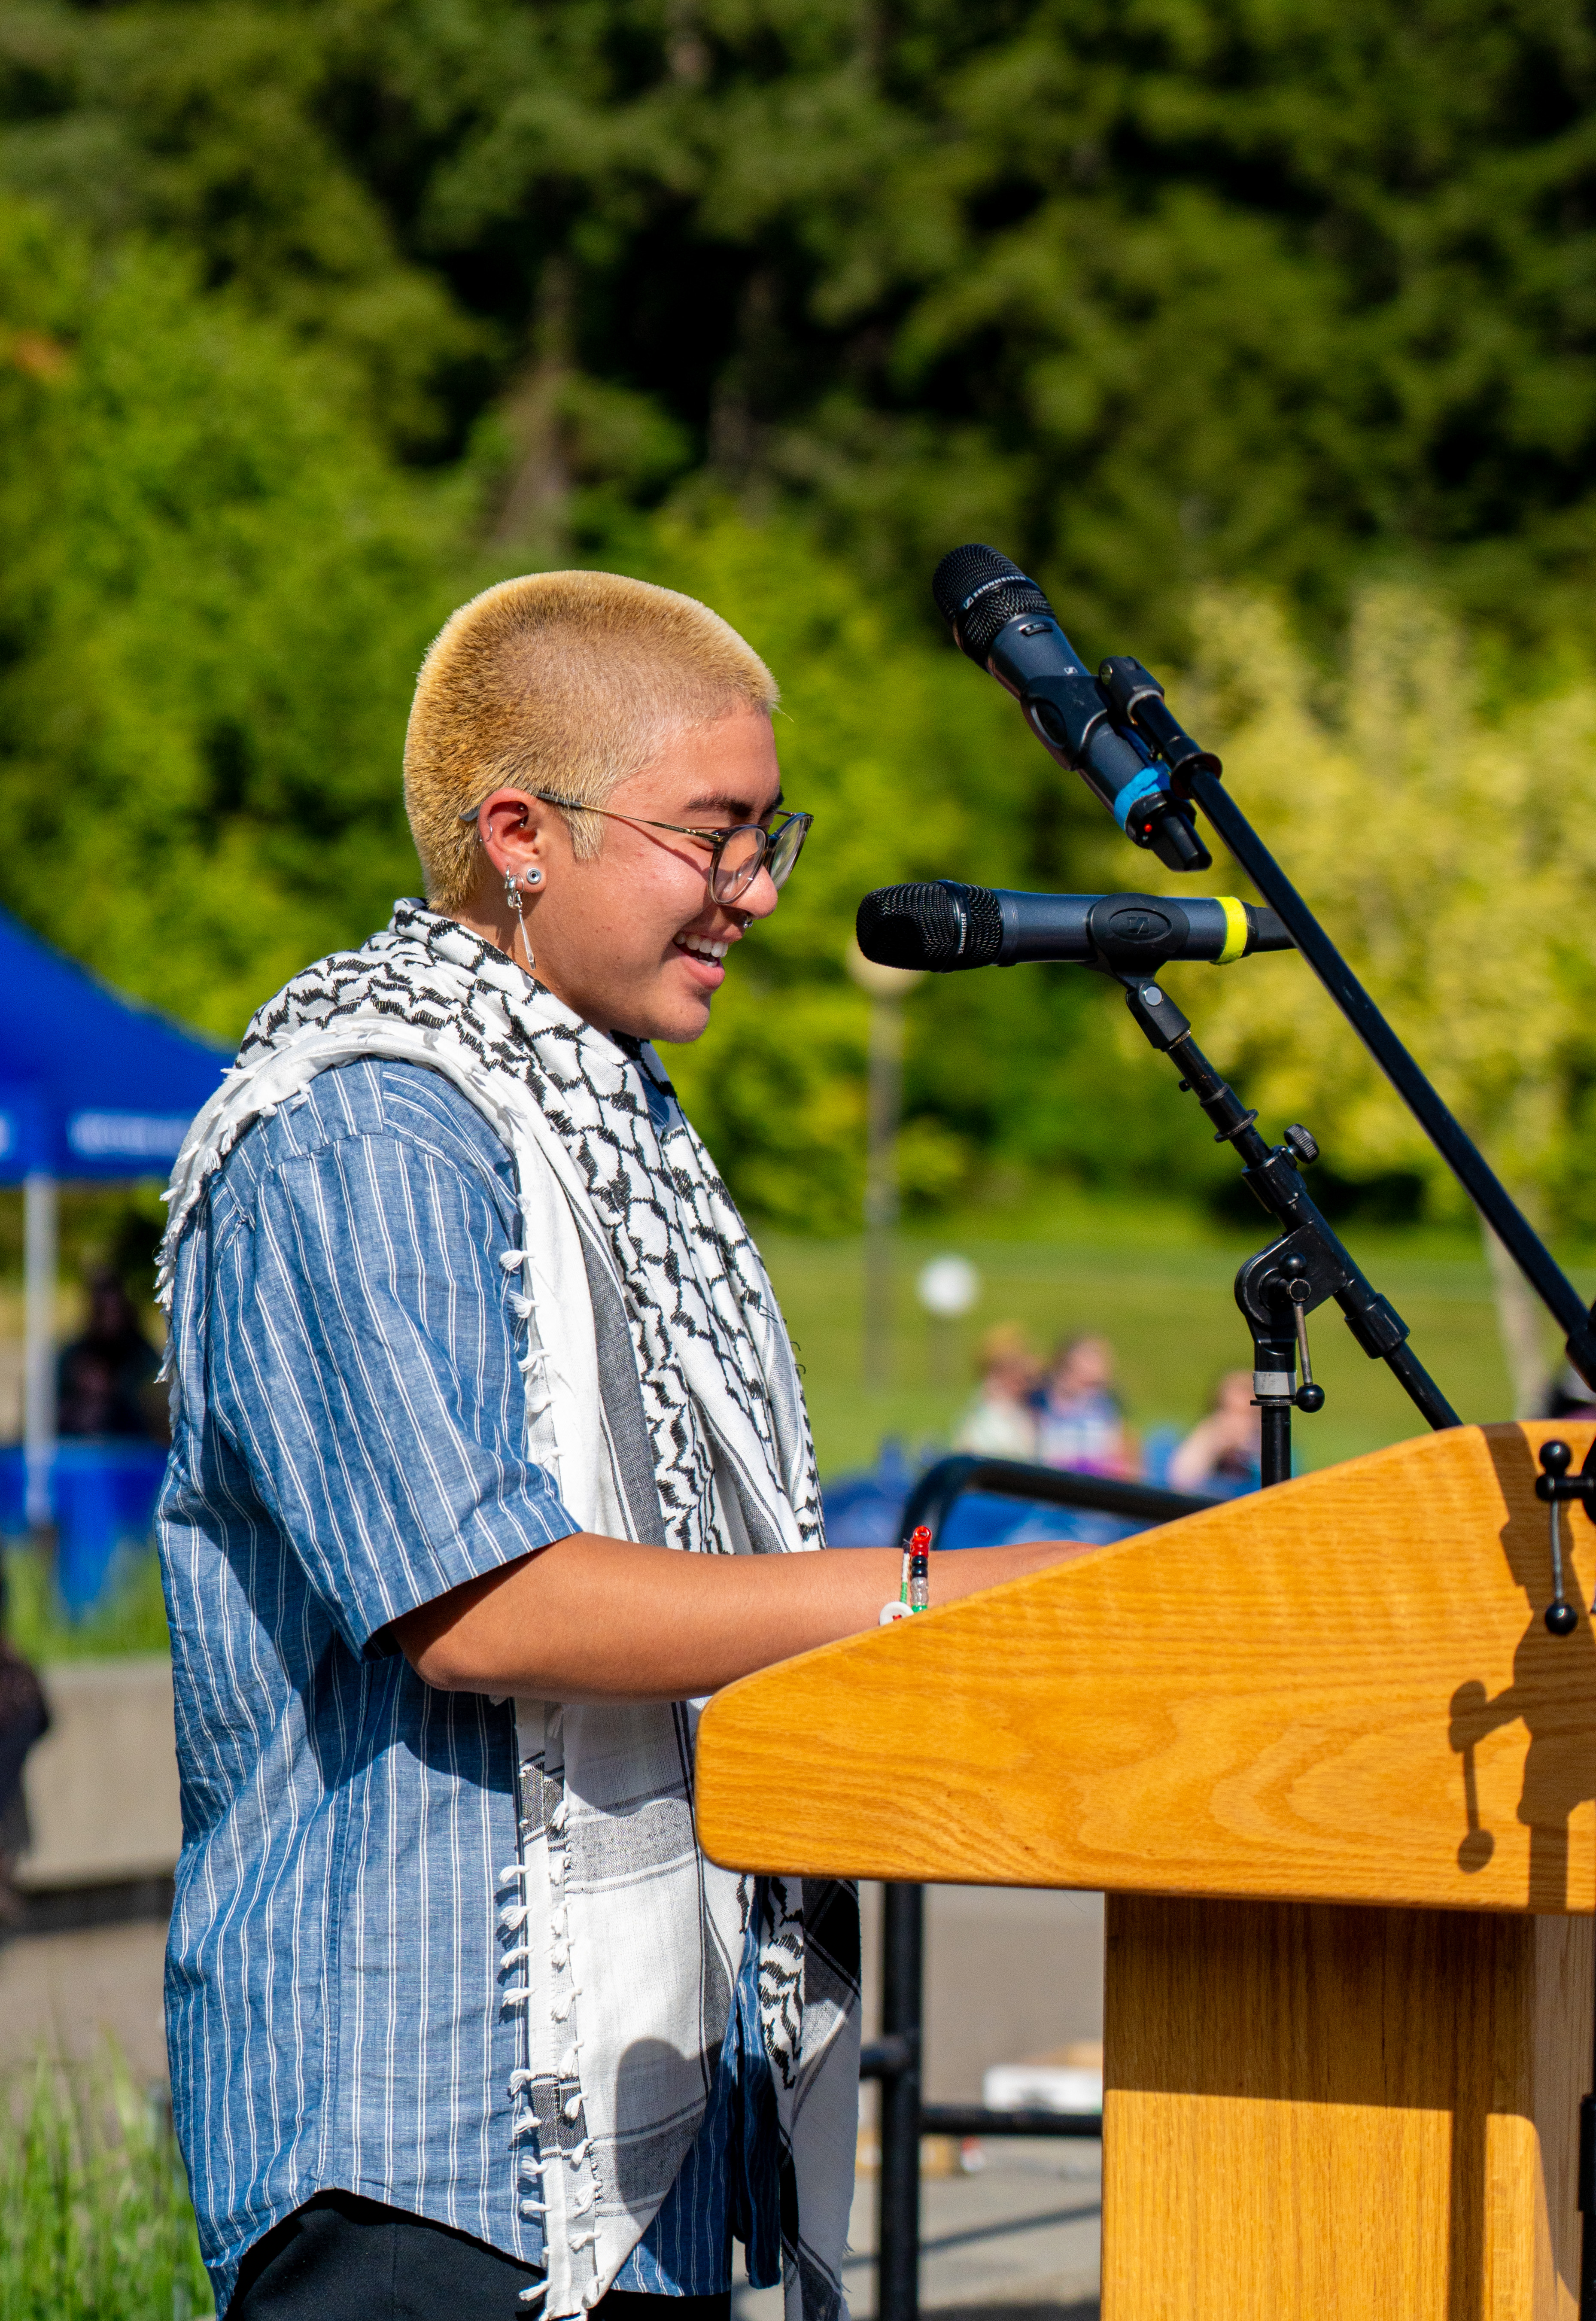 Sof Trujillo wearing a blue shirt and whte and black keffiyeh standing at the podium smiling.